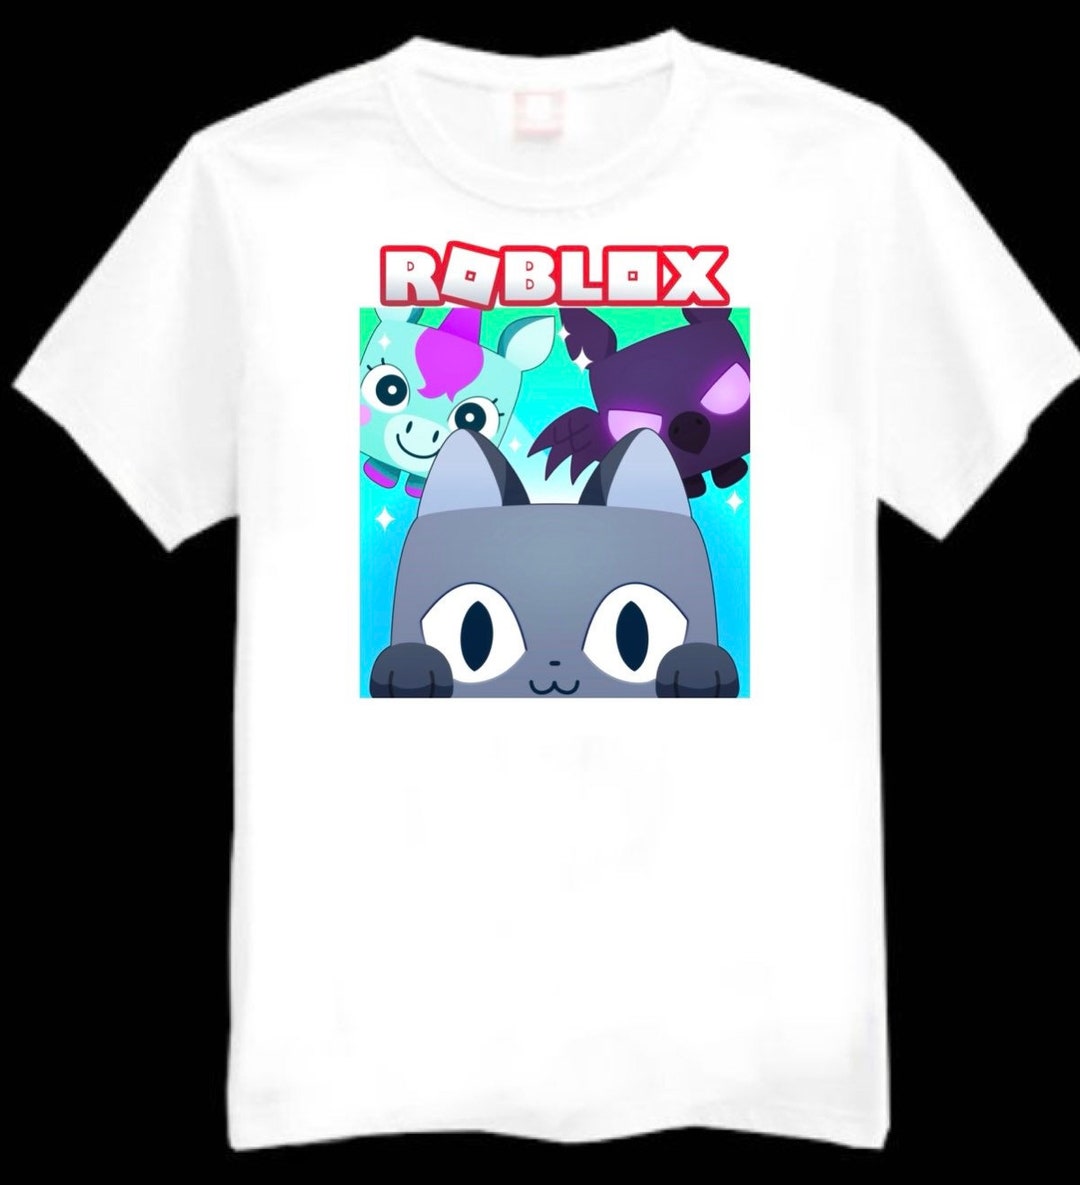 Roblox T-Shirt with Personal User Name Kids Shirt - Child & Adult